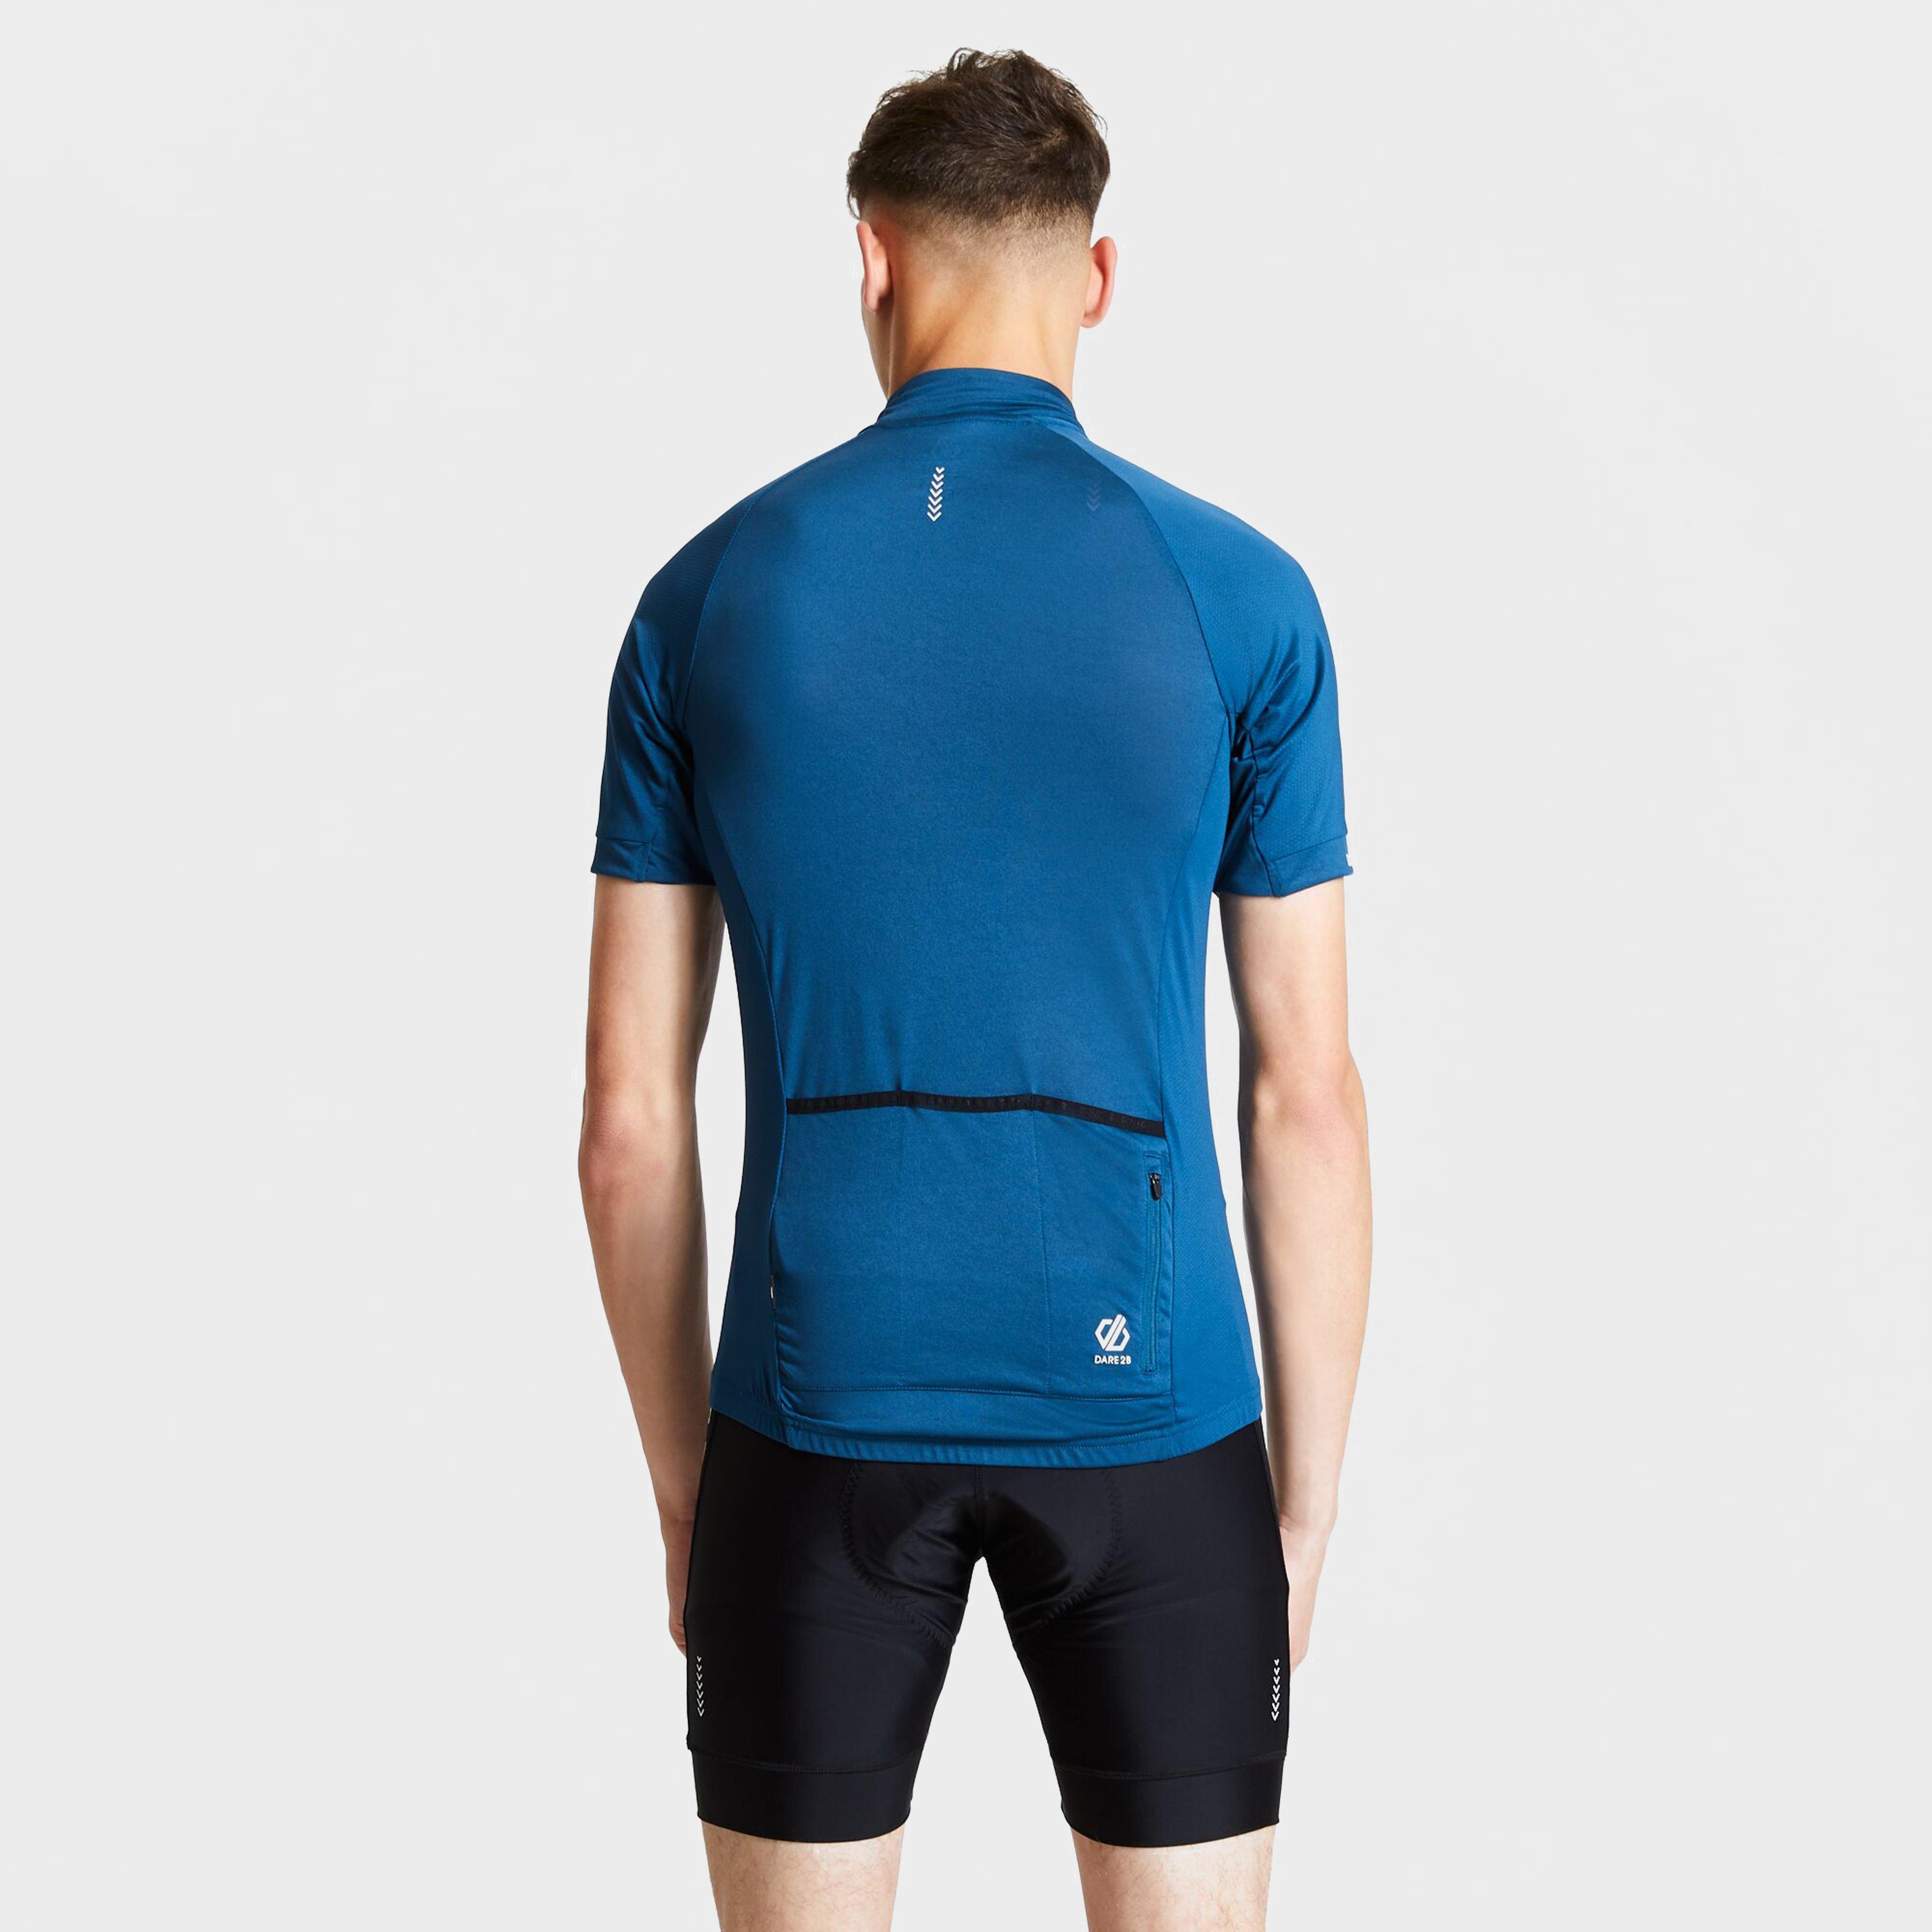 Dare 2B Stay The Course Cycling Jersey Review